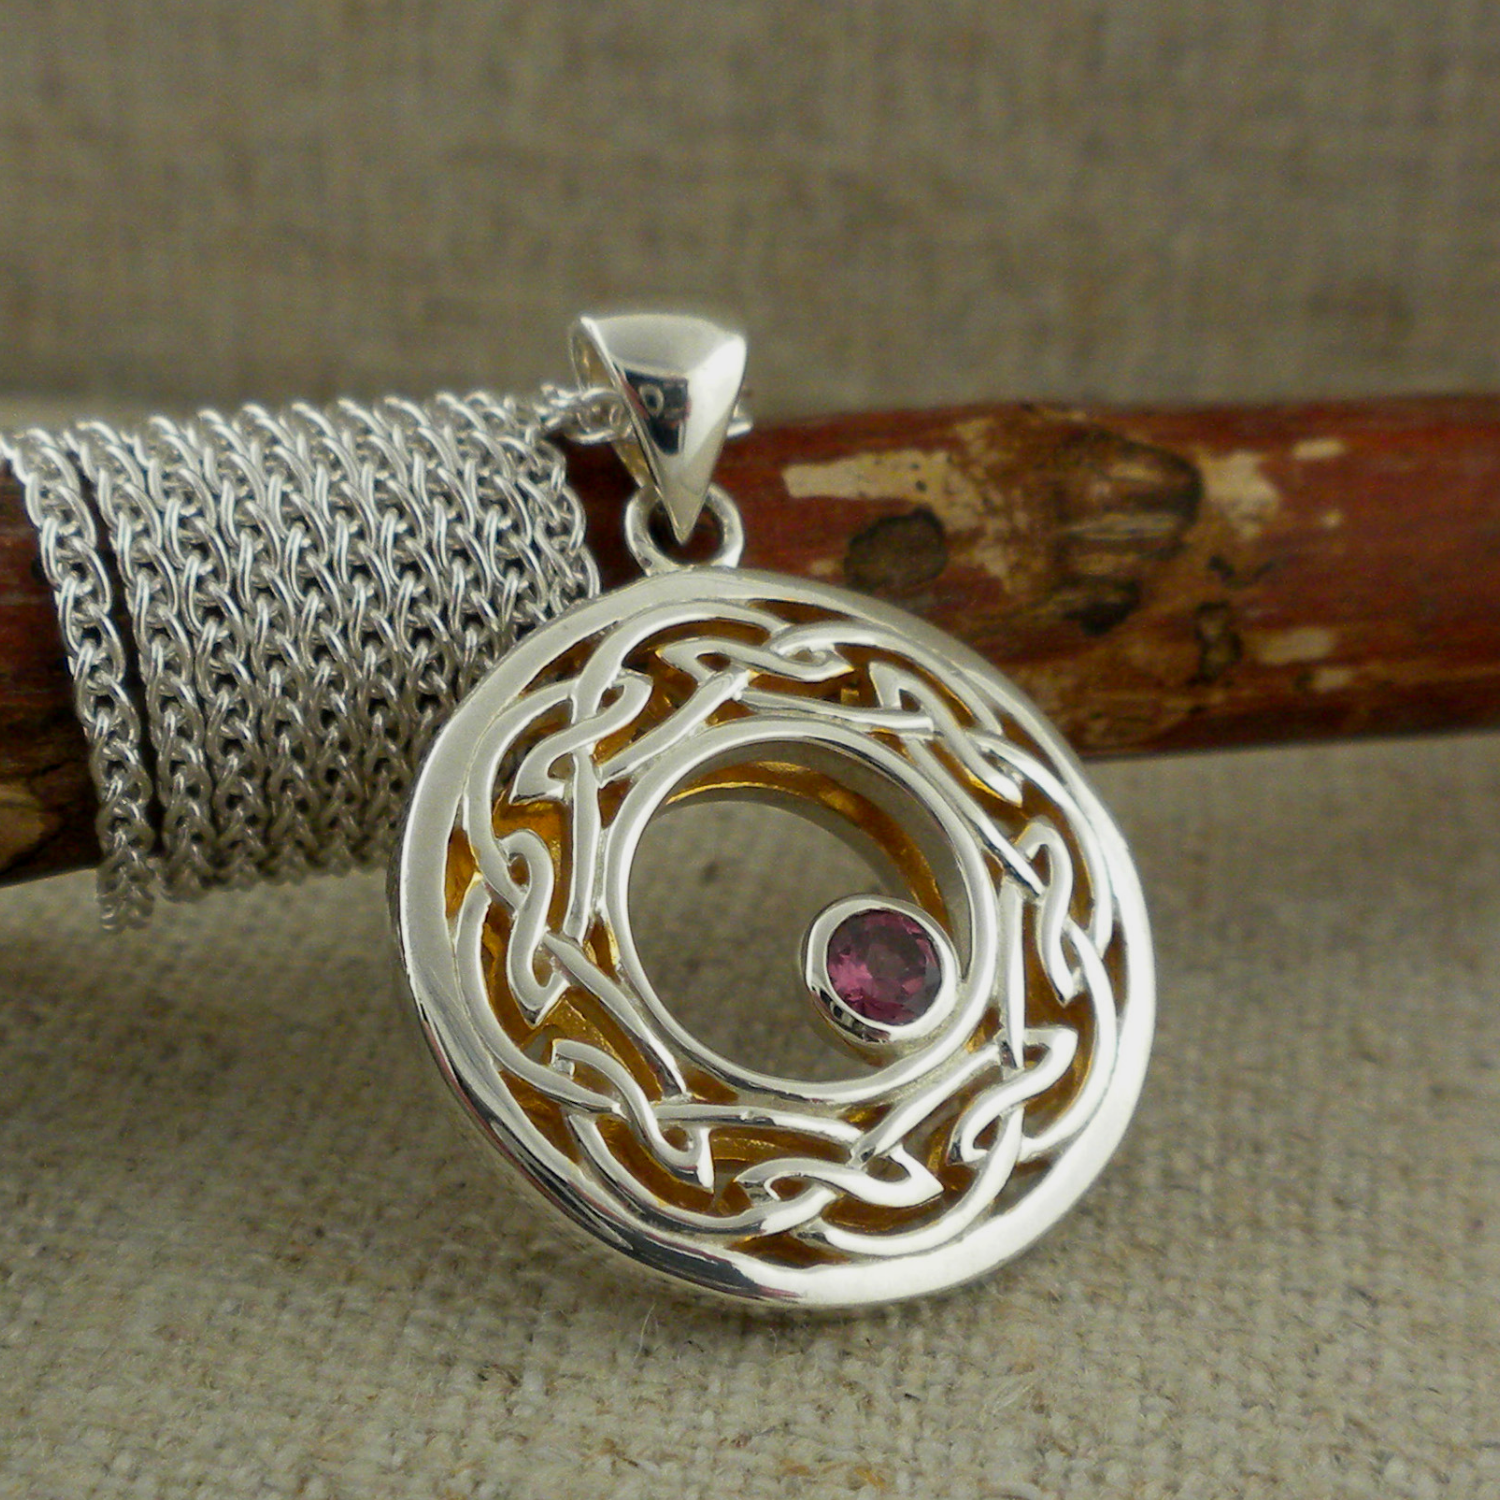 Window to the Soul Pendant with Gem